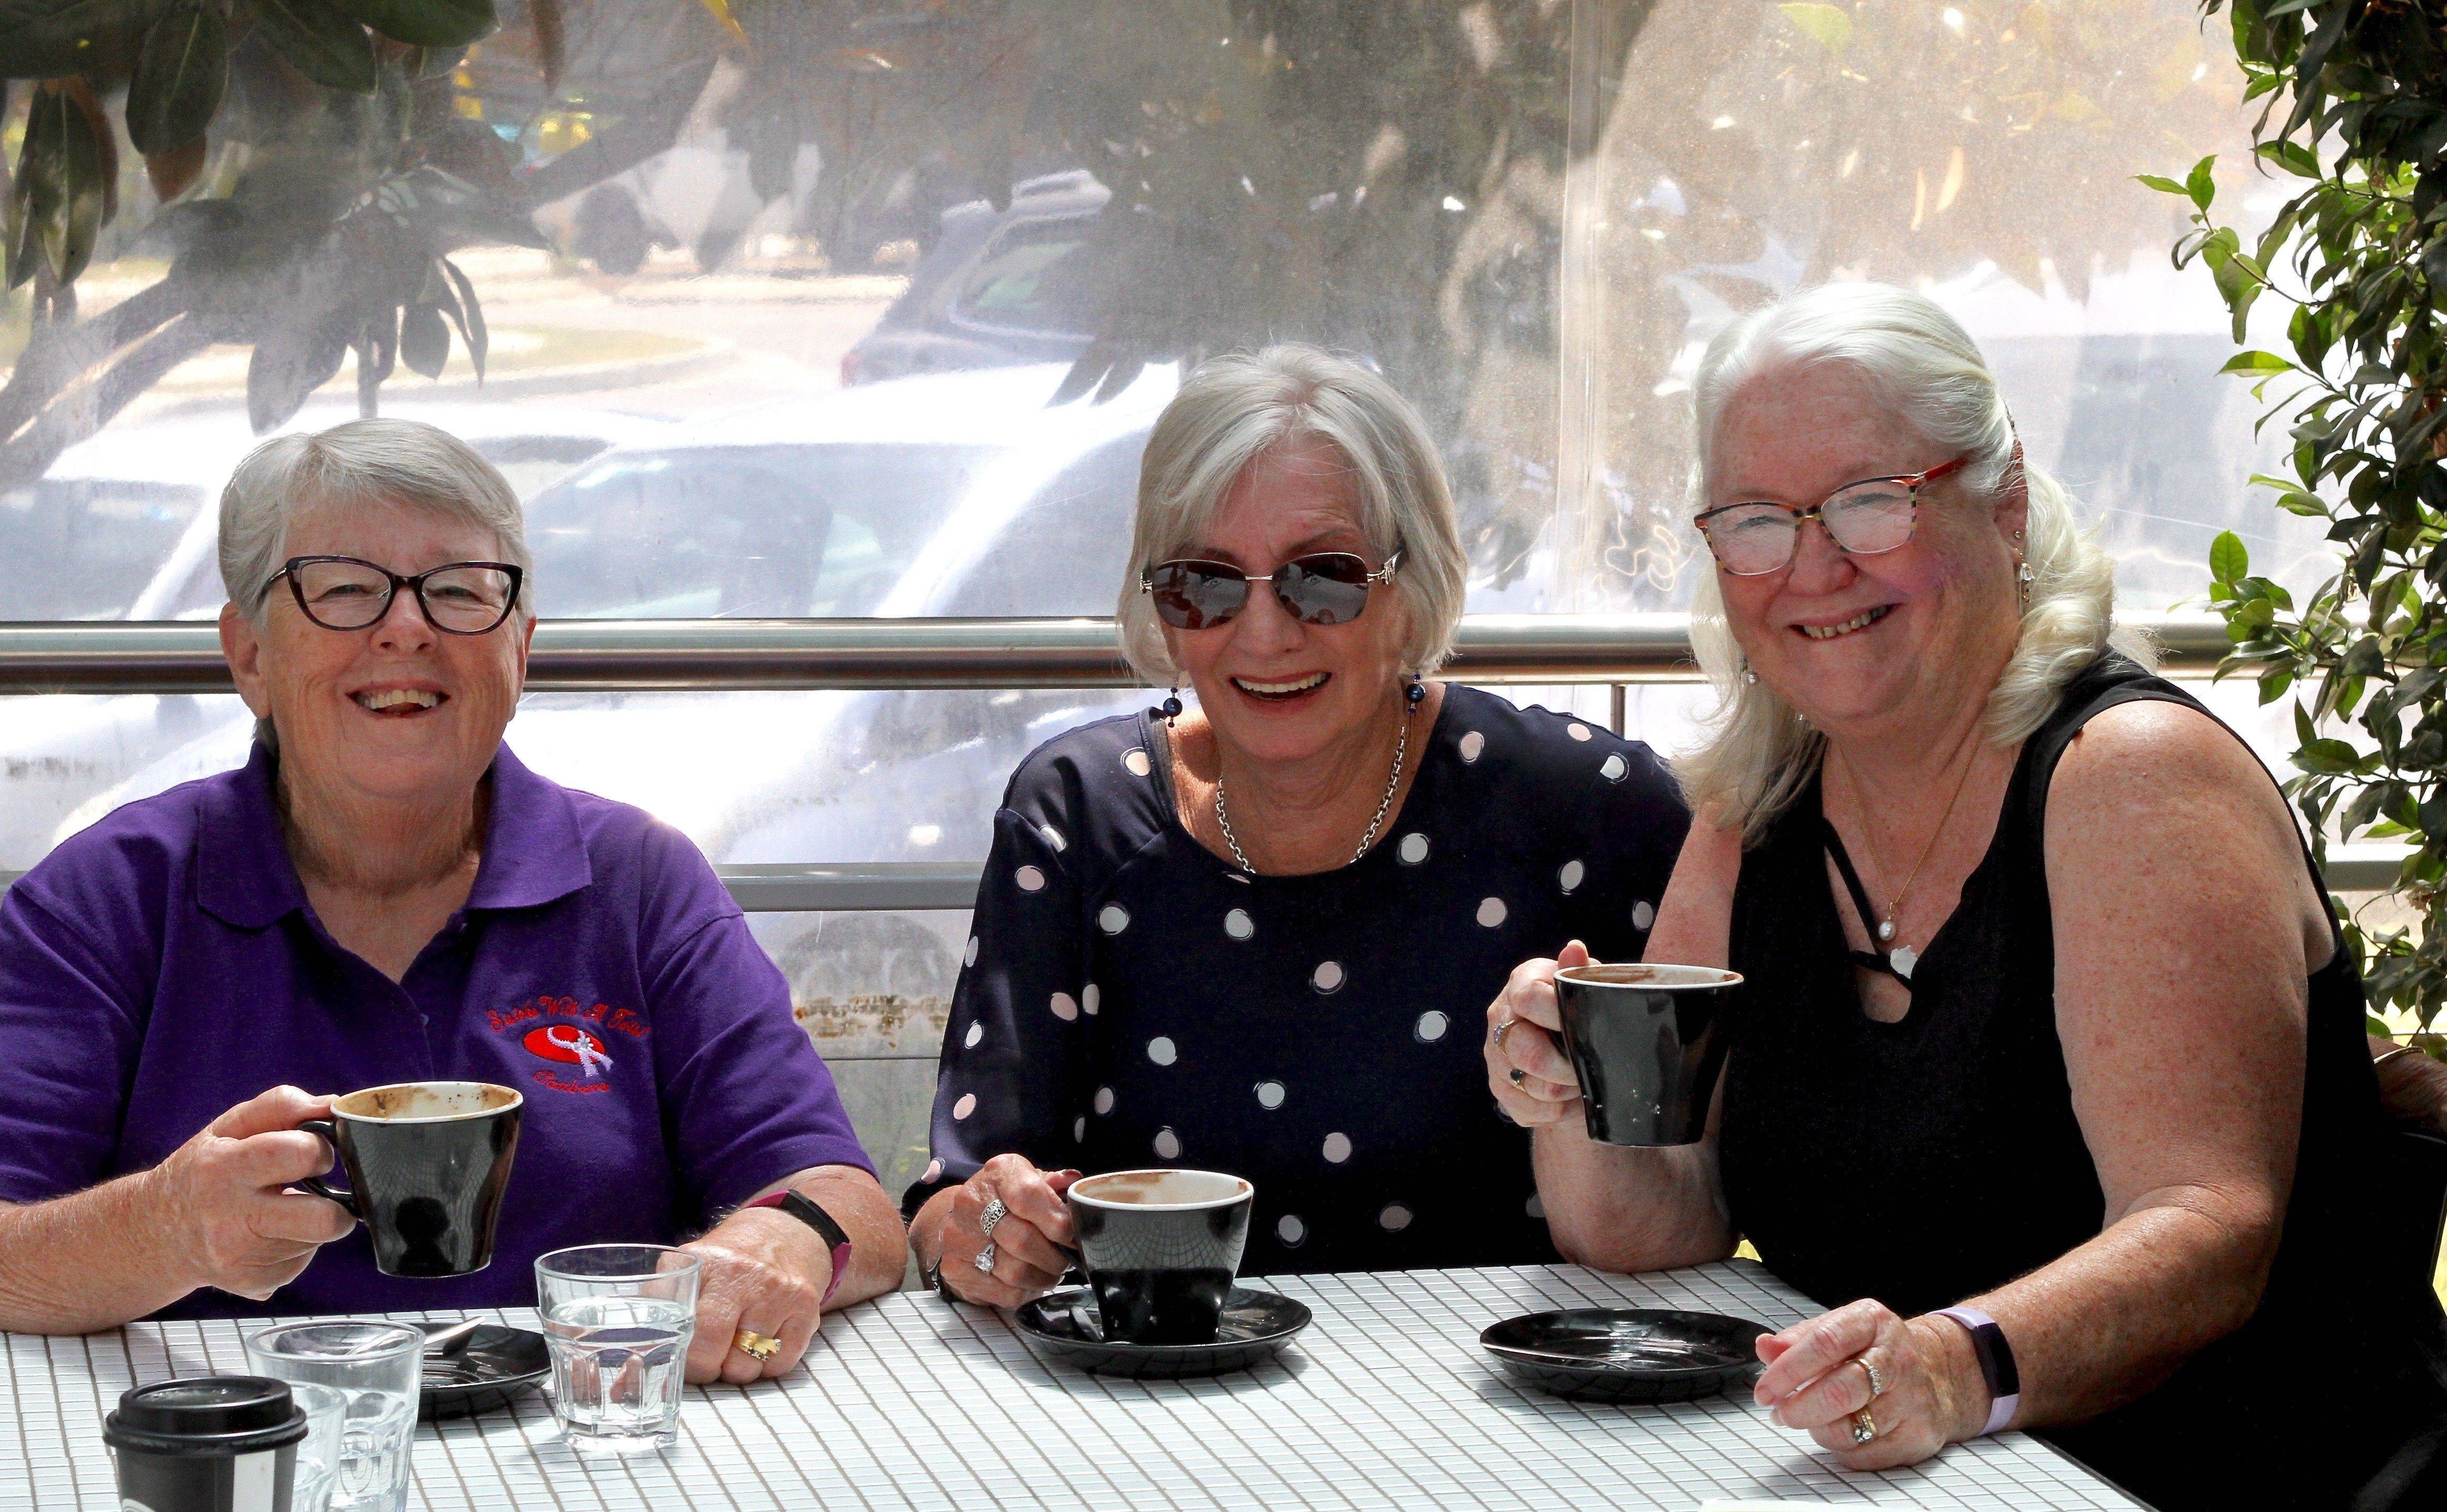 Red Hatters fit in with a splash of purple to connect women in Canberra